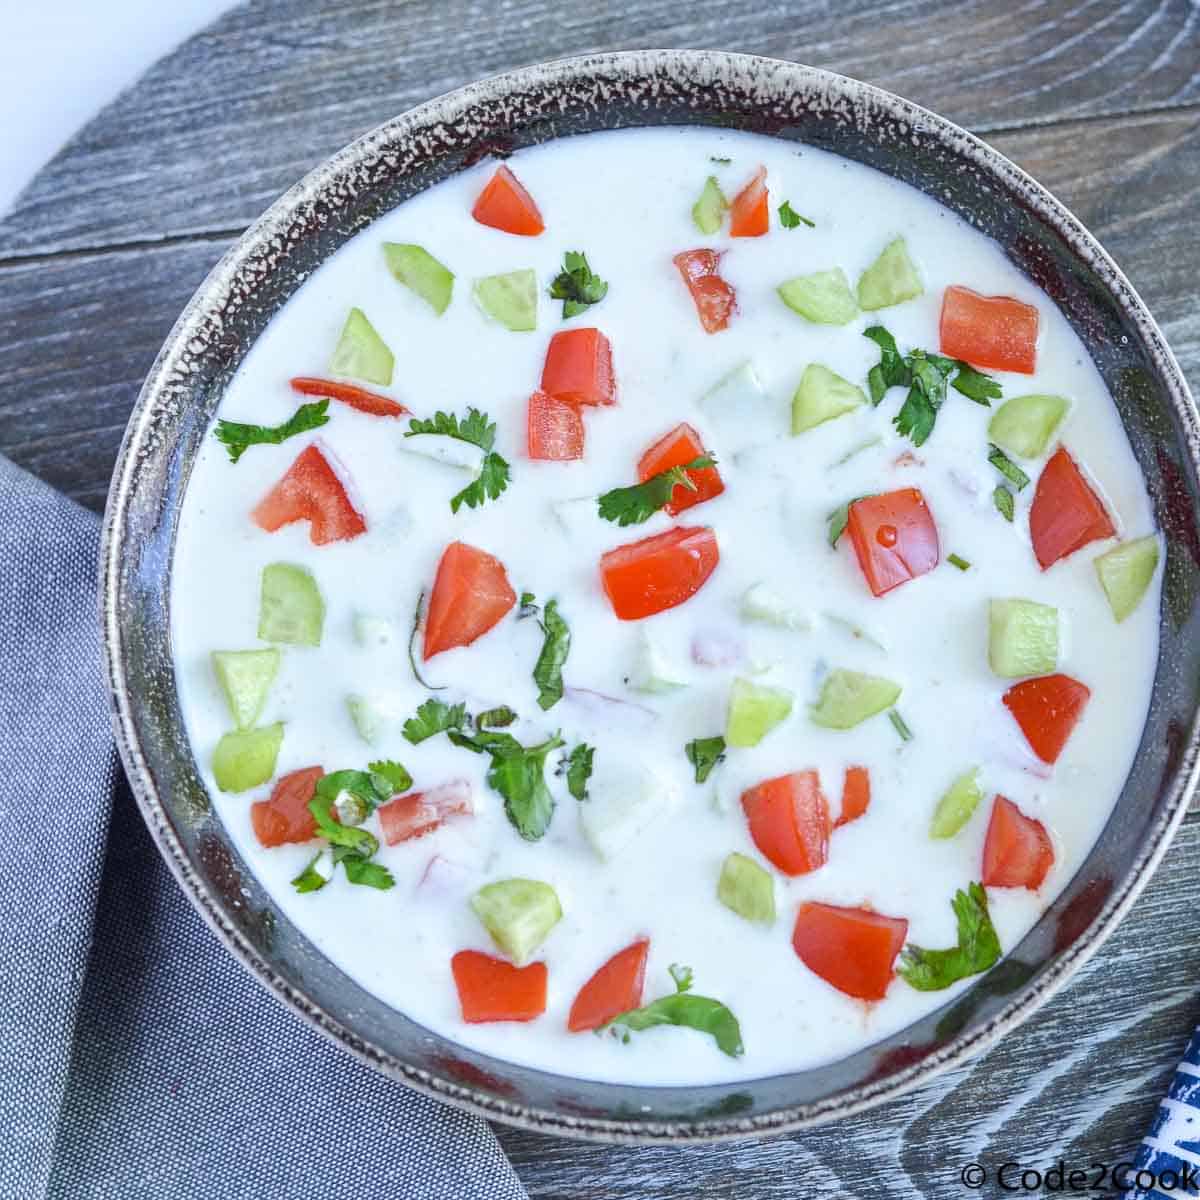 Raita is served in grey bowl and garnished with chopped tomato and cucumber.